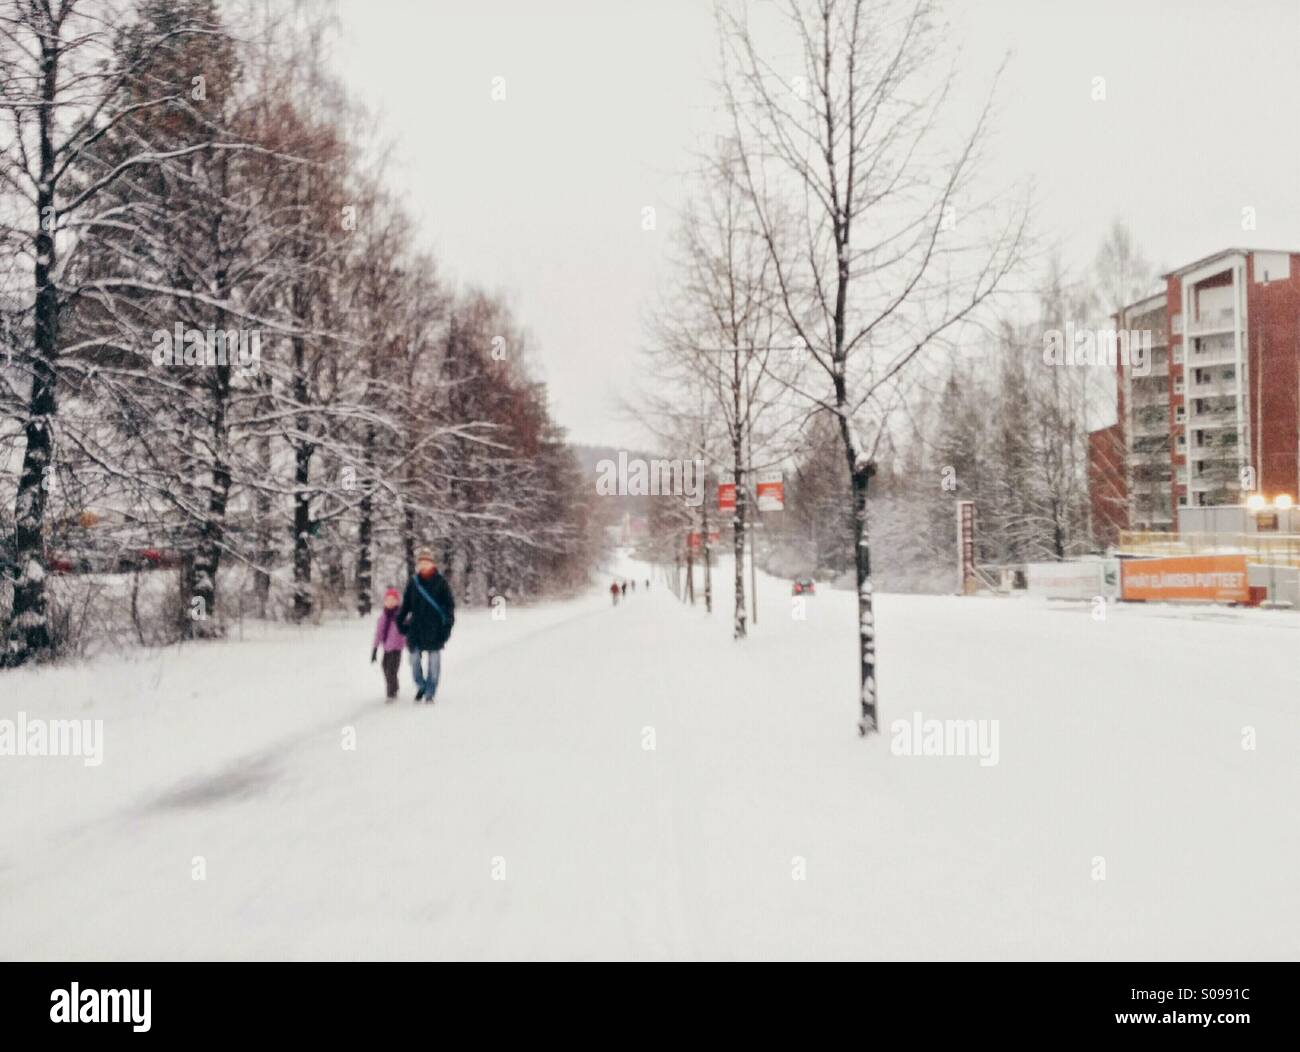 Snowy day in Finland Stock Photo